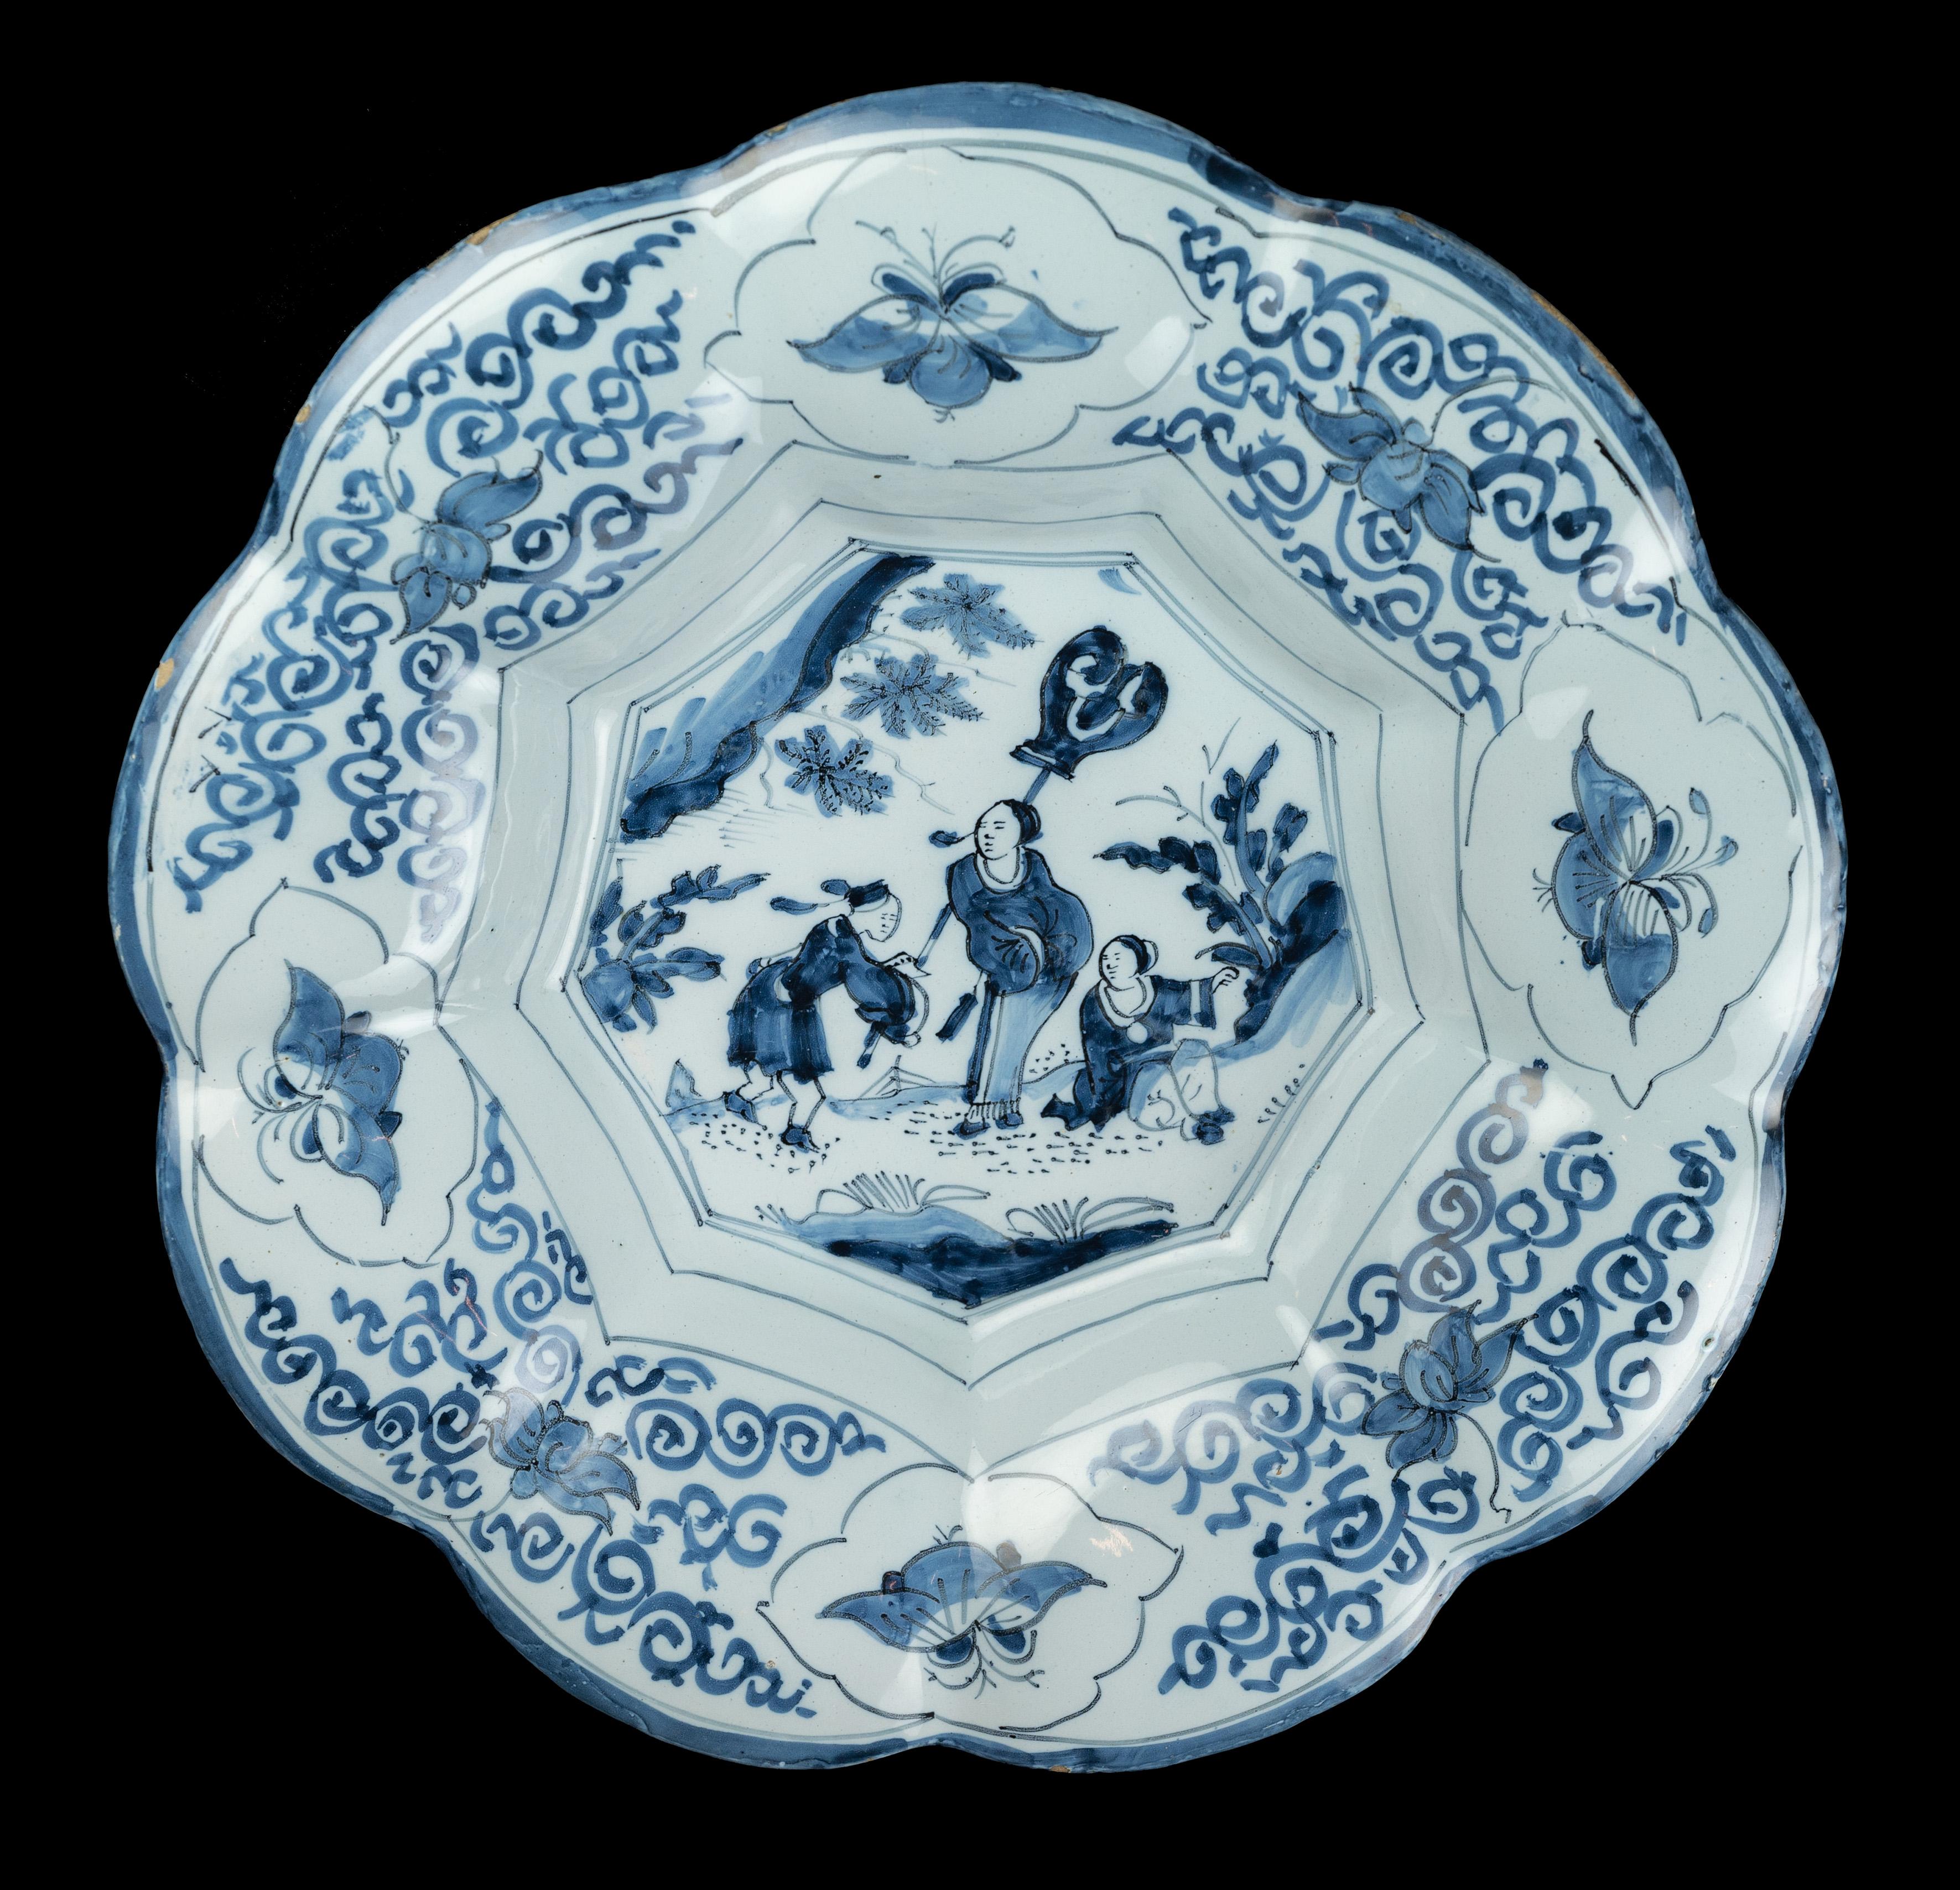 Blue and white chinoiserie lobed dish. Delft, 1680-1700 
Dimensions: diameter 35 cm / 13.77 in. 

The blue and white lobed dish is composed of nine wide lobes around a nine-fold centre and is painted with a chinoiserie decor, framed within lines